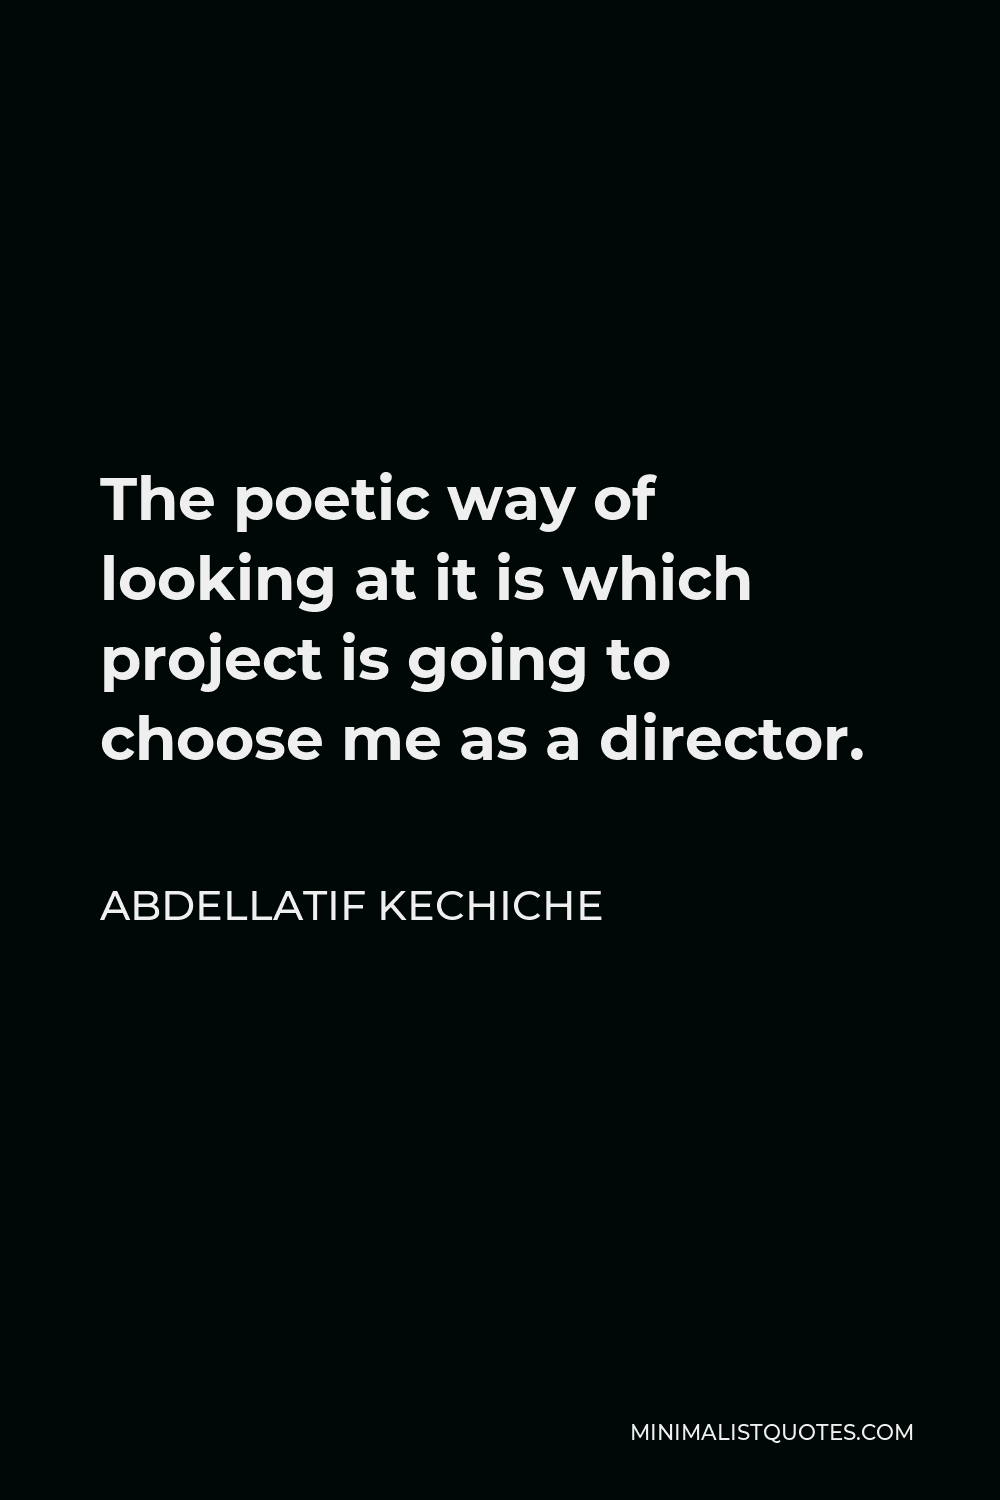 Abdellatif Kechiche Quote - The poetic way of looking at it is which project is going to choose me as a director.